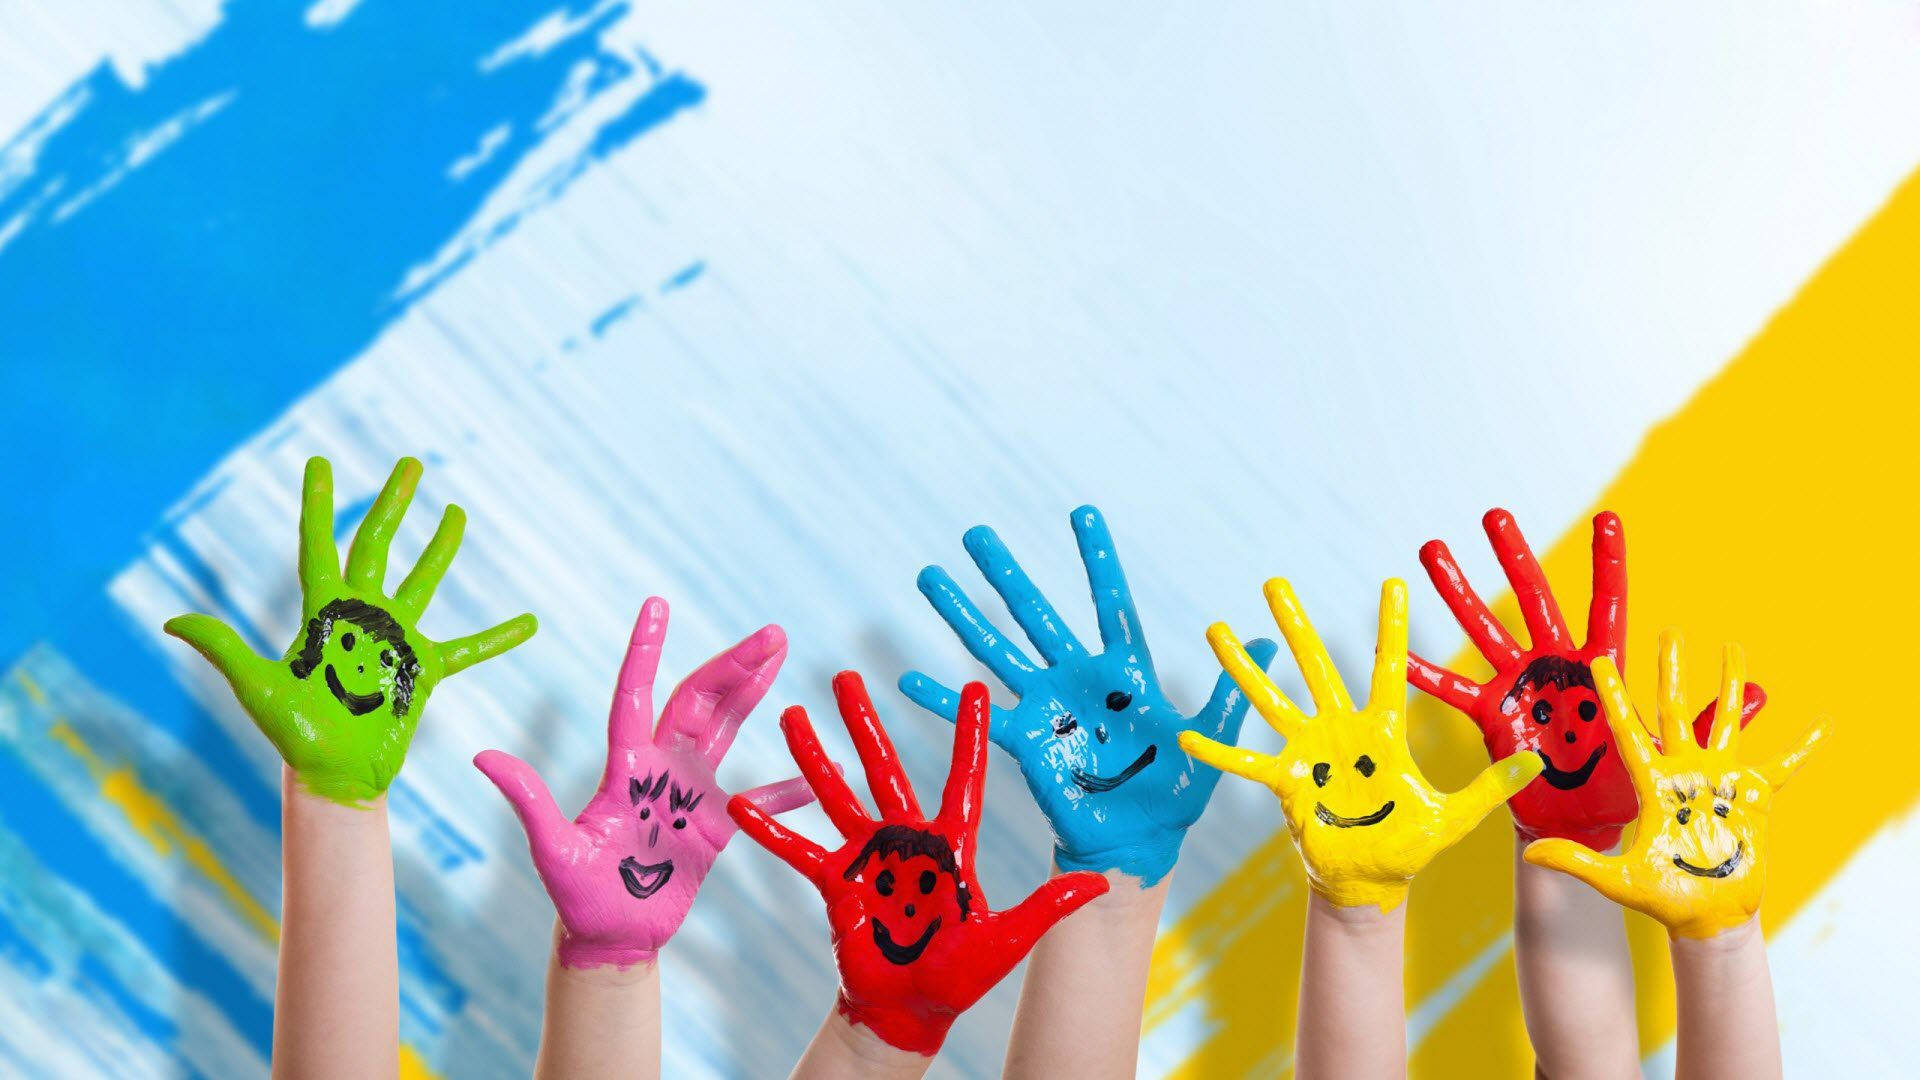 Painted Children's Hands With Happy Faces Wallpaper